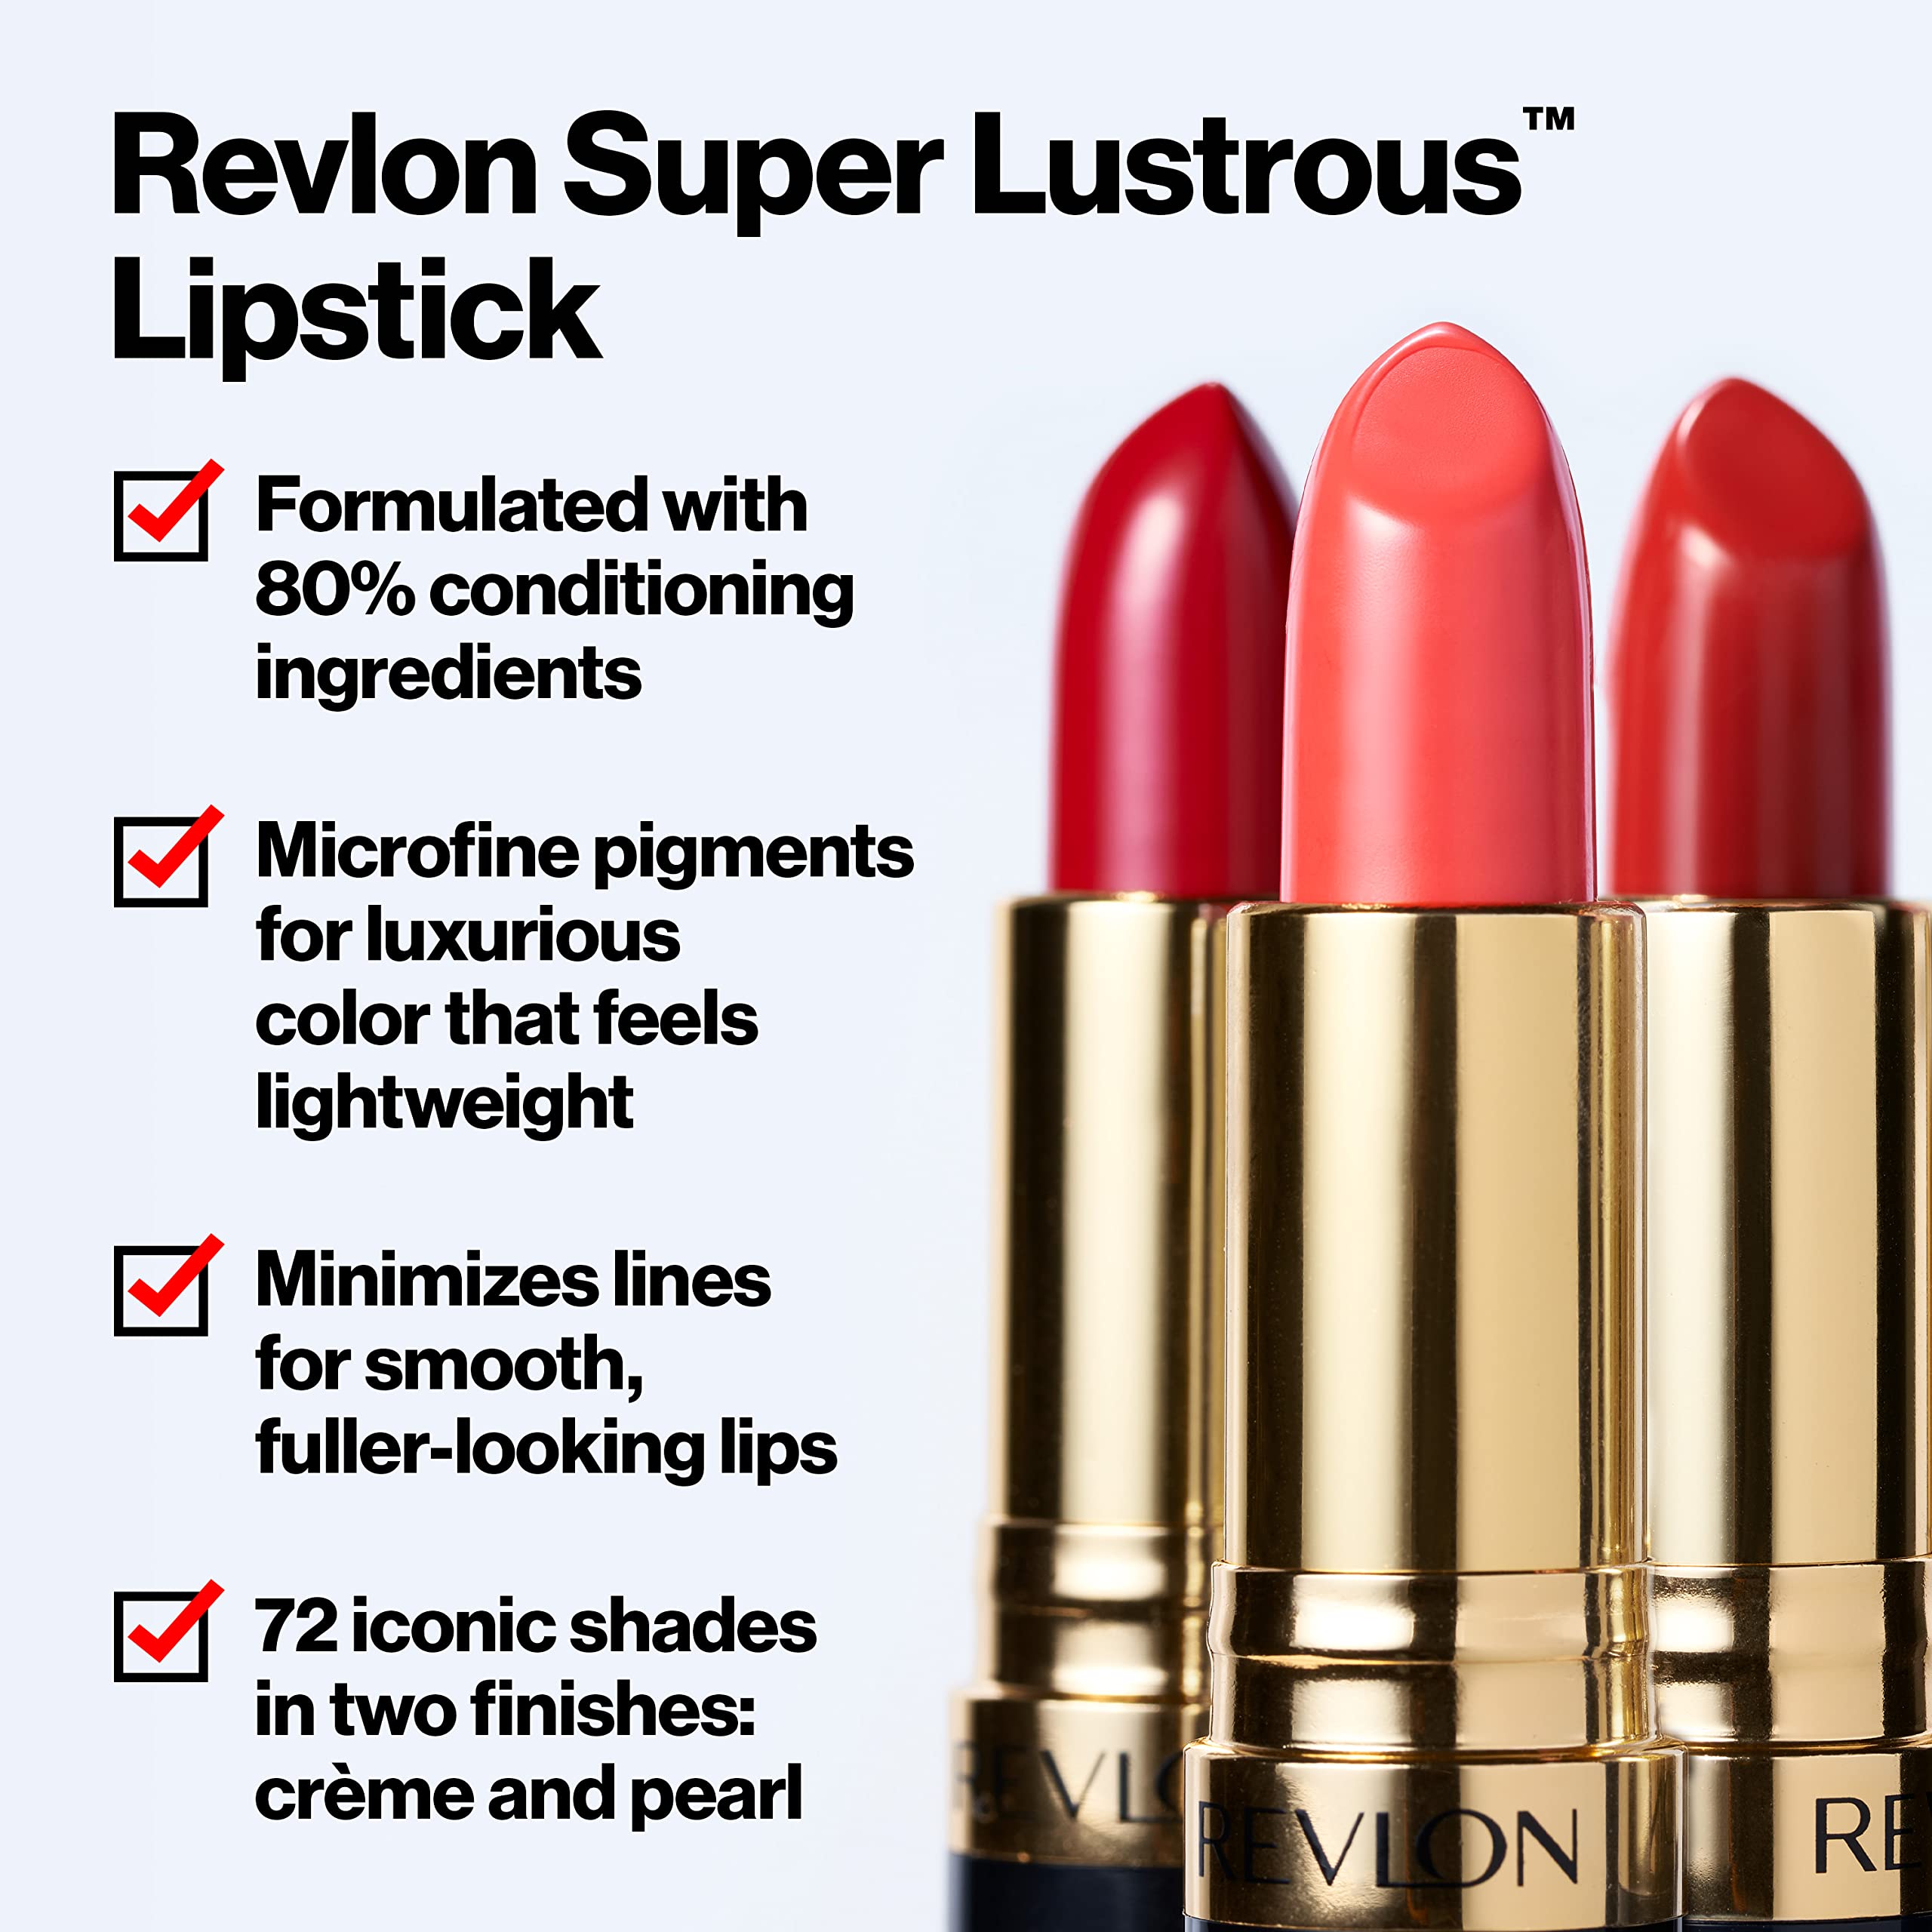 Revlon Super Lustrous Lipstick, High Impact Lipcolor with Moisturizing Creamy Formula, Infused with Vitamin E and Avocado Oil in Reds & Corals, Kiss Me Coral (750) 0.15 oz